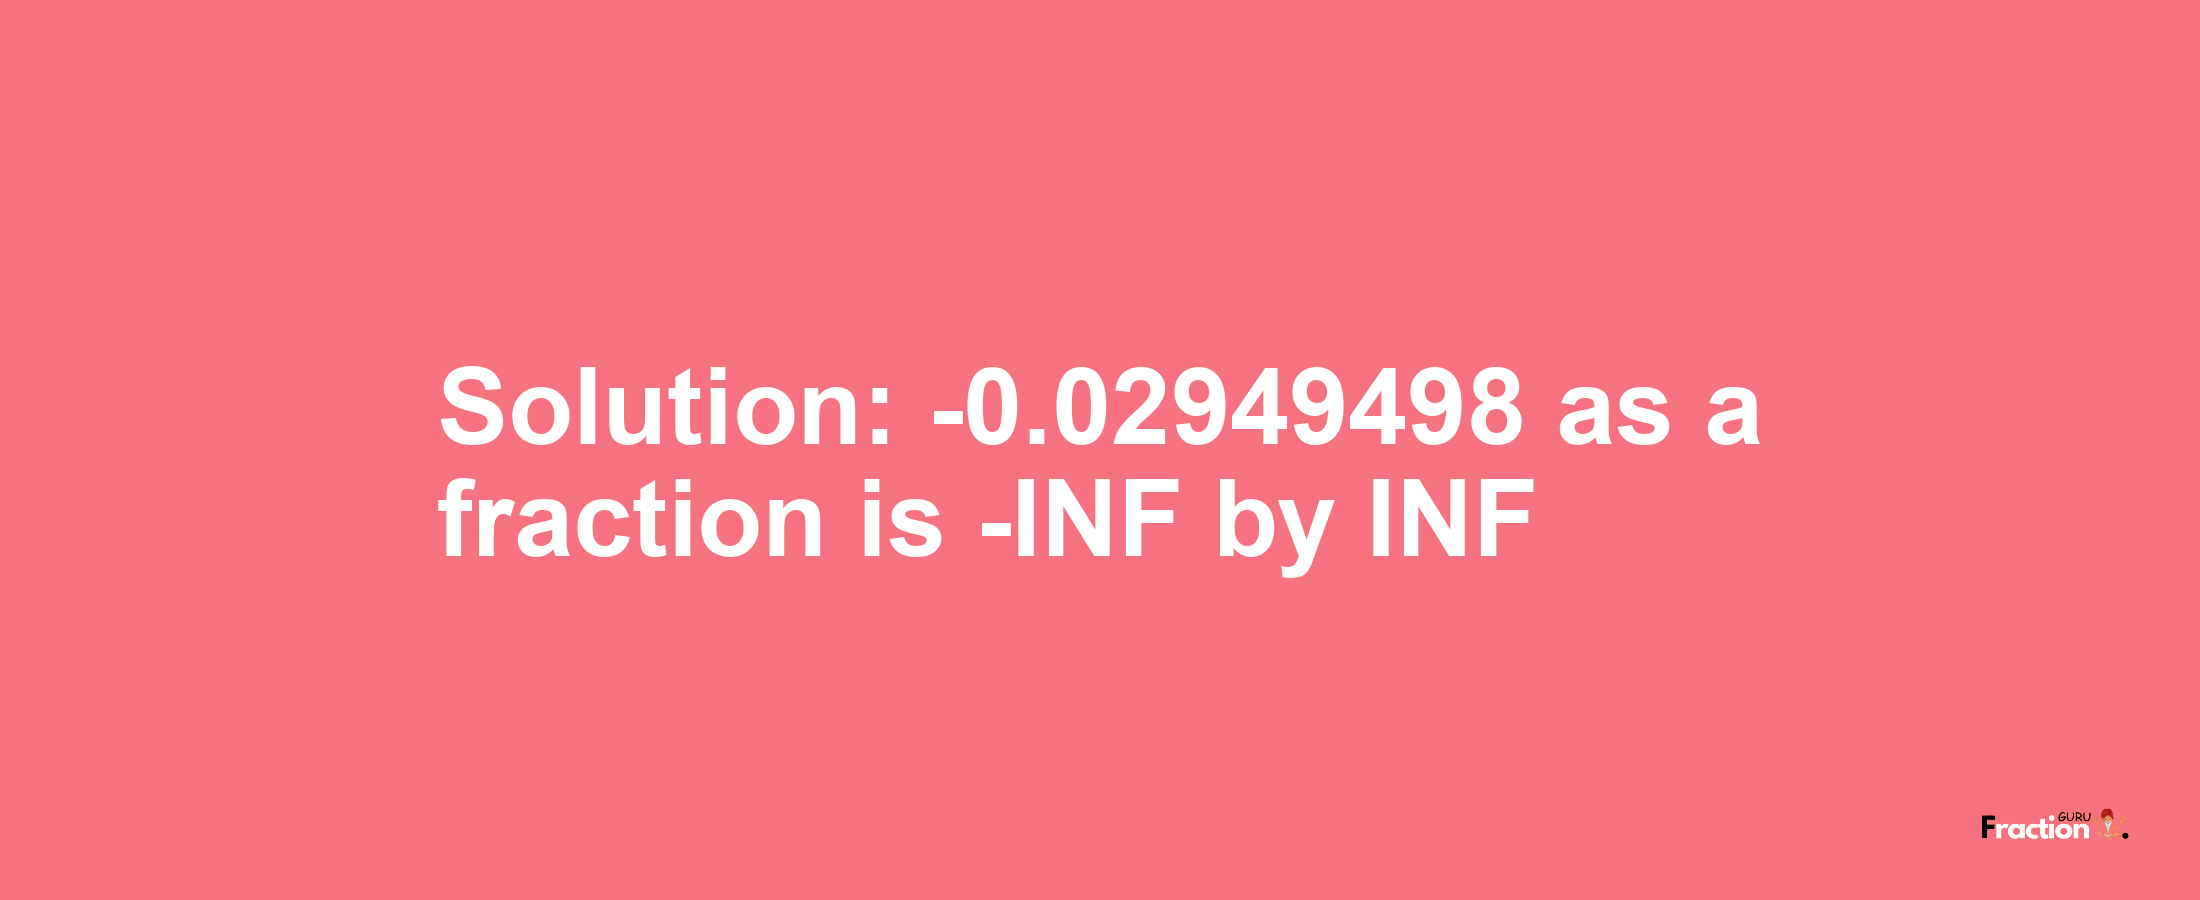 Solution:-0.02949498 as a fraction is -INF/INF